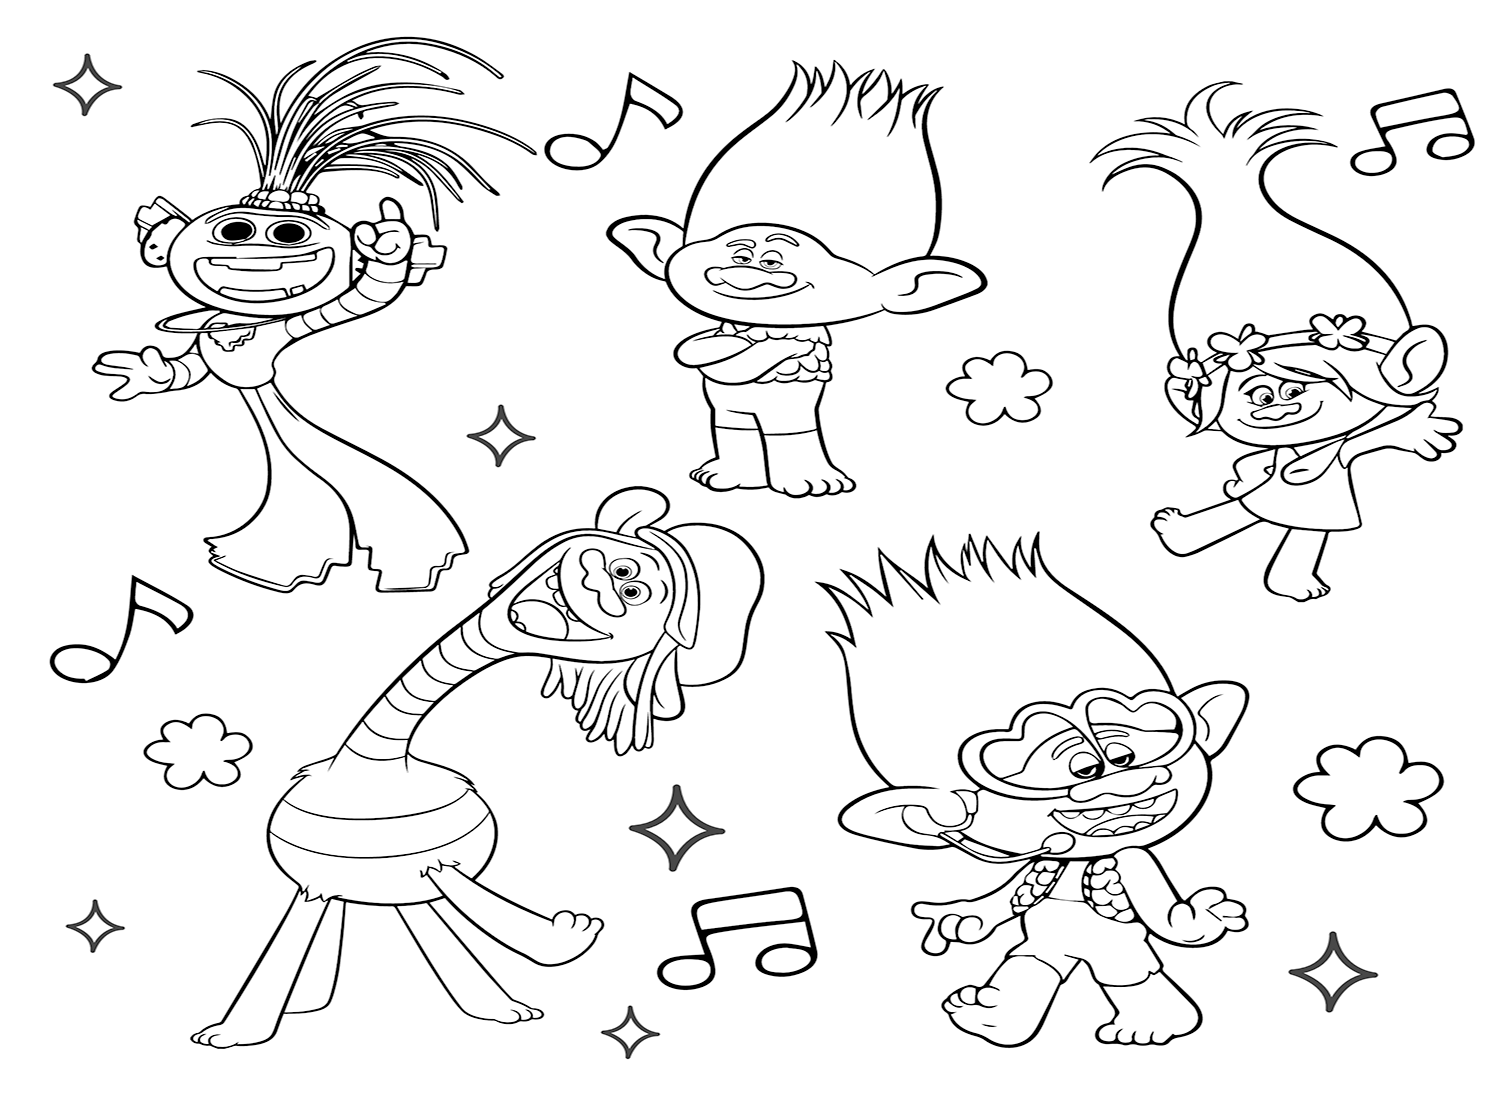 Trolls 2 World Tour Coloring Page